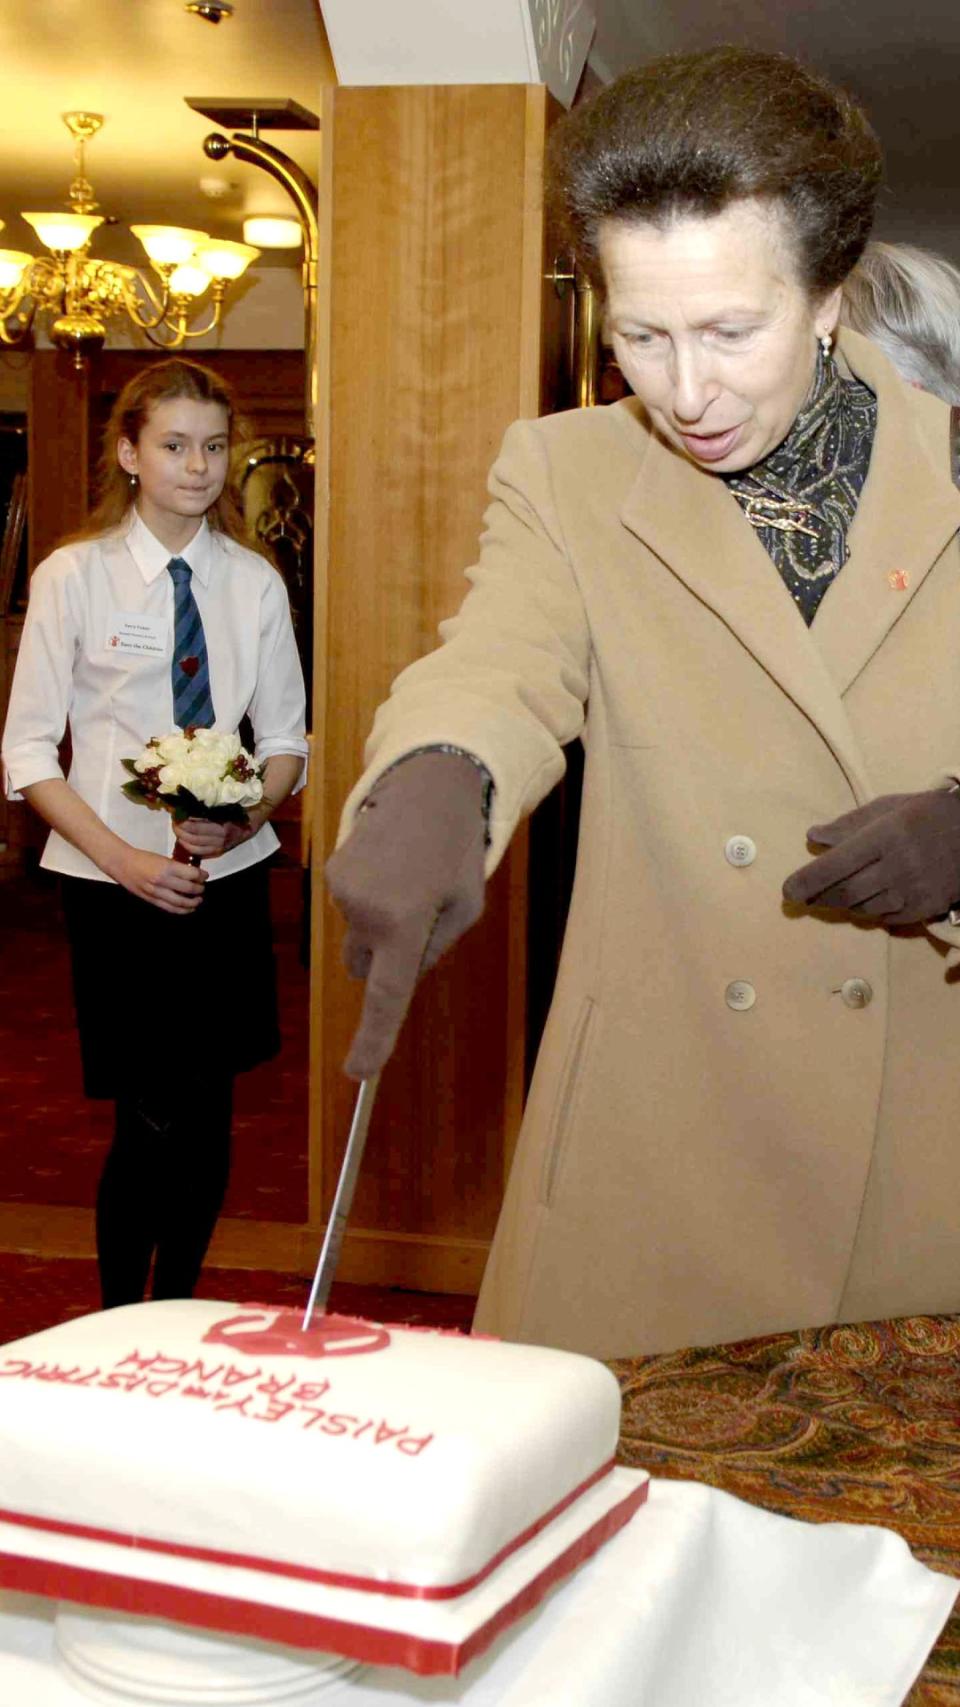 When she wanted everyone to eat cake - but not like another famous royal...